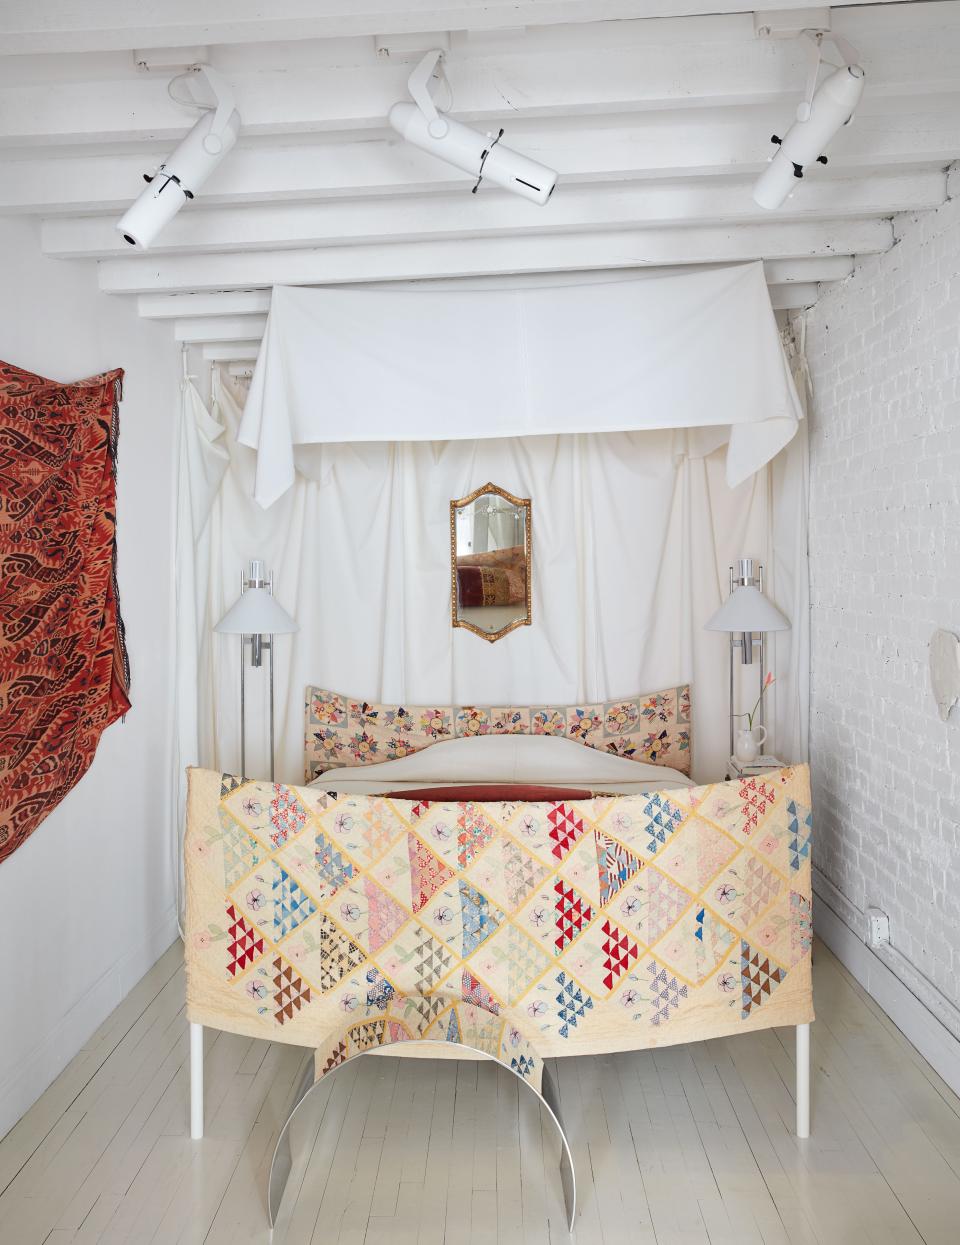 Vintage Robert Sonneman floor lamps flank the bed, which he slipcovered in a patchwork quilt.